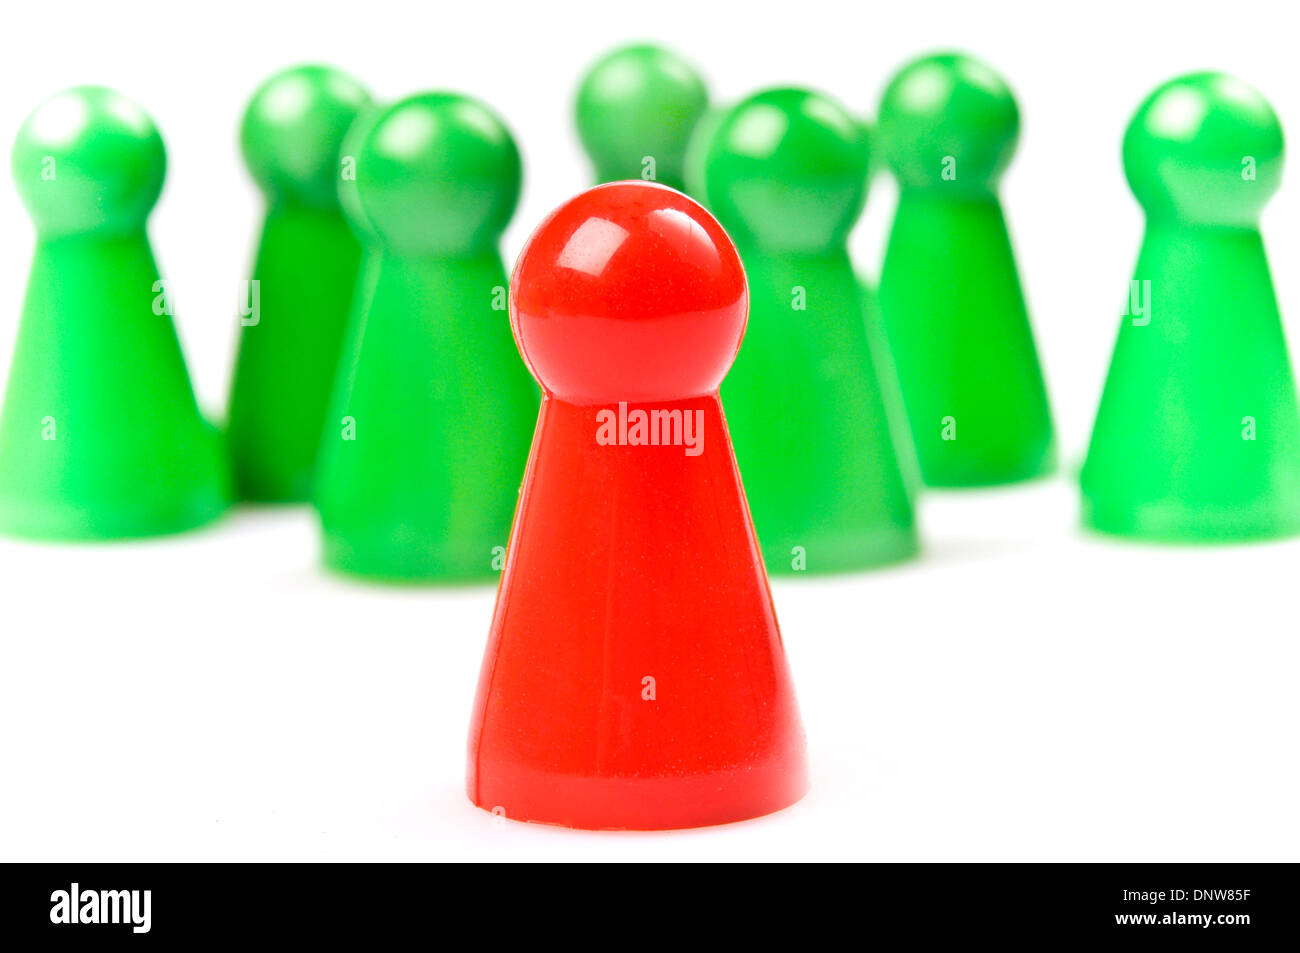 green plastic counters with one red, leadership concept Stock Photo